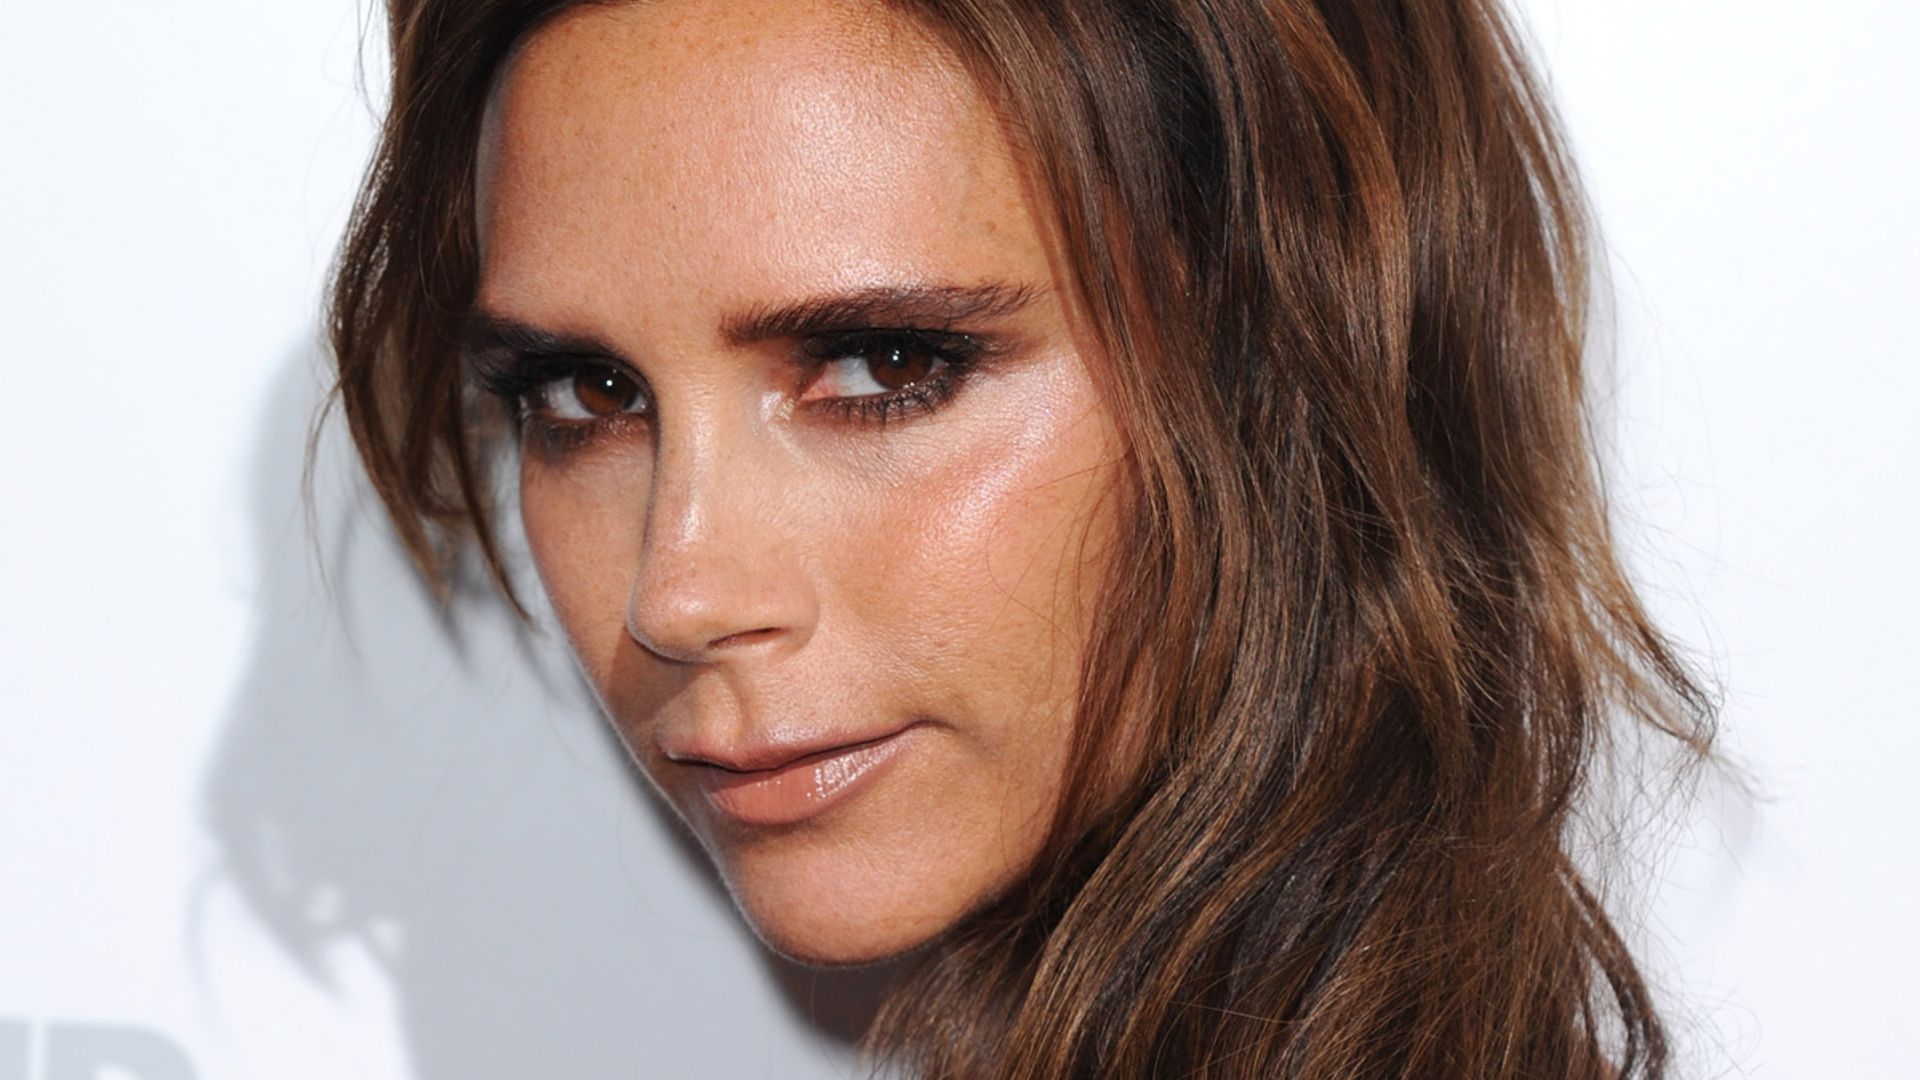 Victoria Beckham’s skintight ‘posh’ onesie has fans exclaiming the same thing